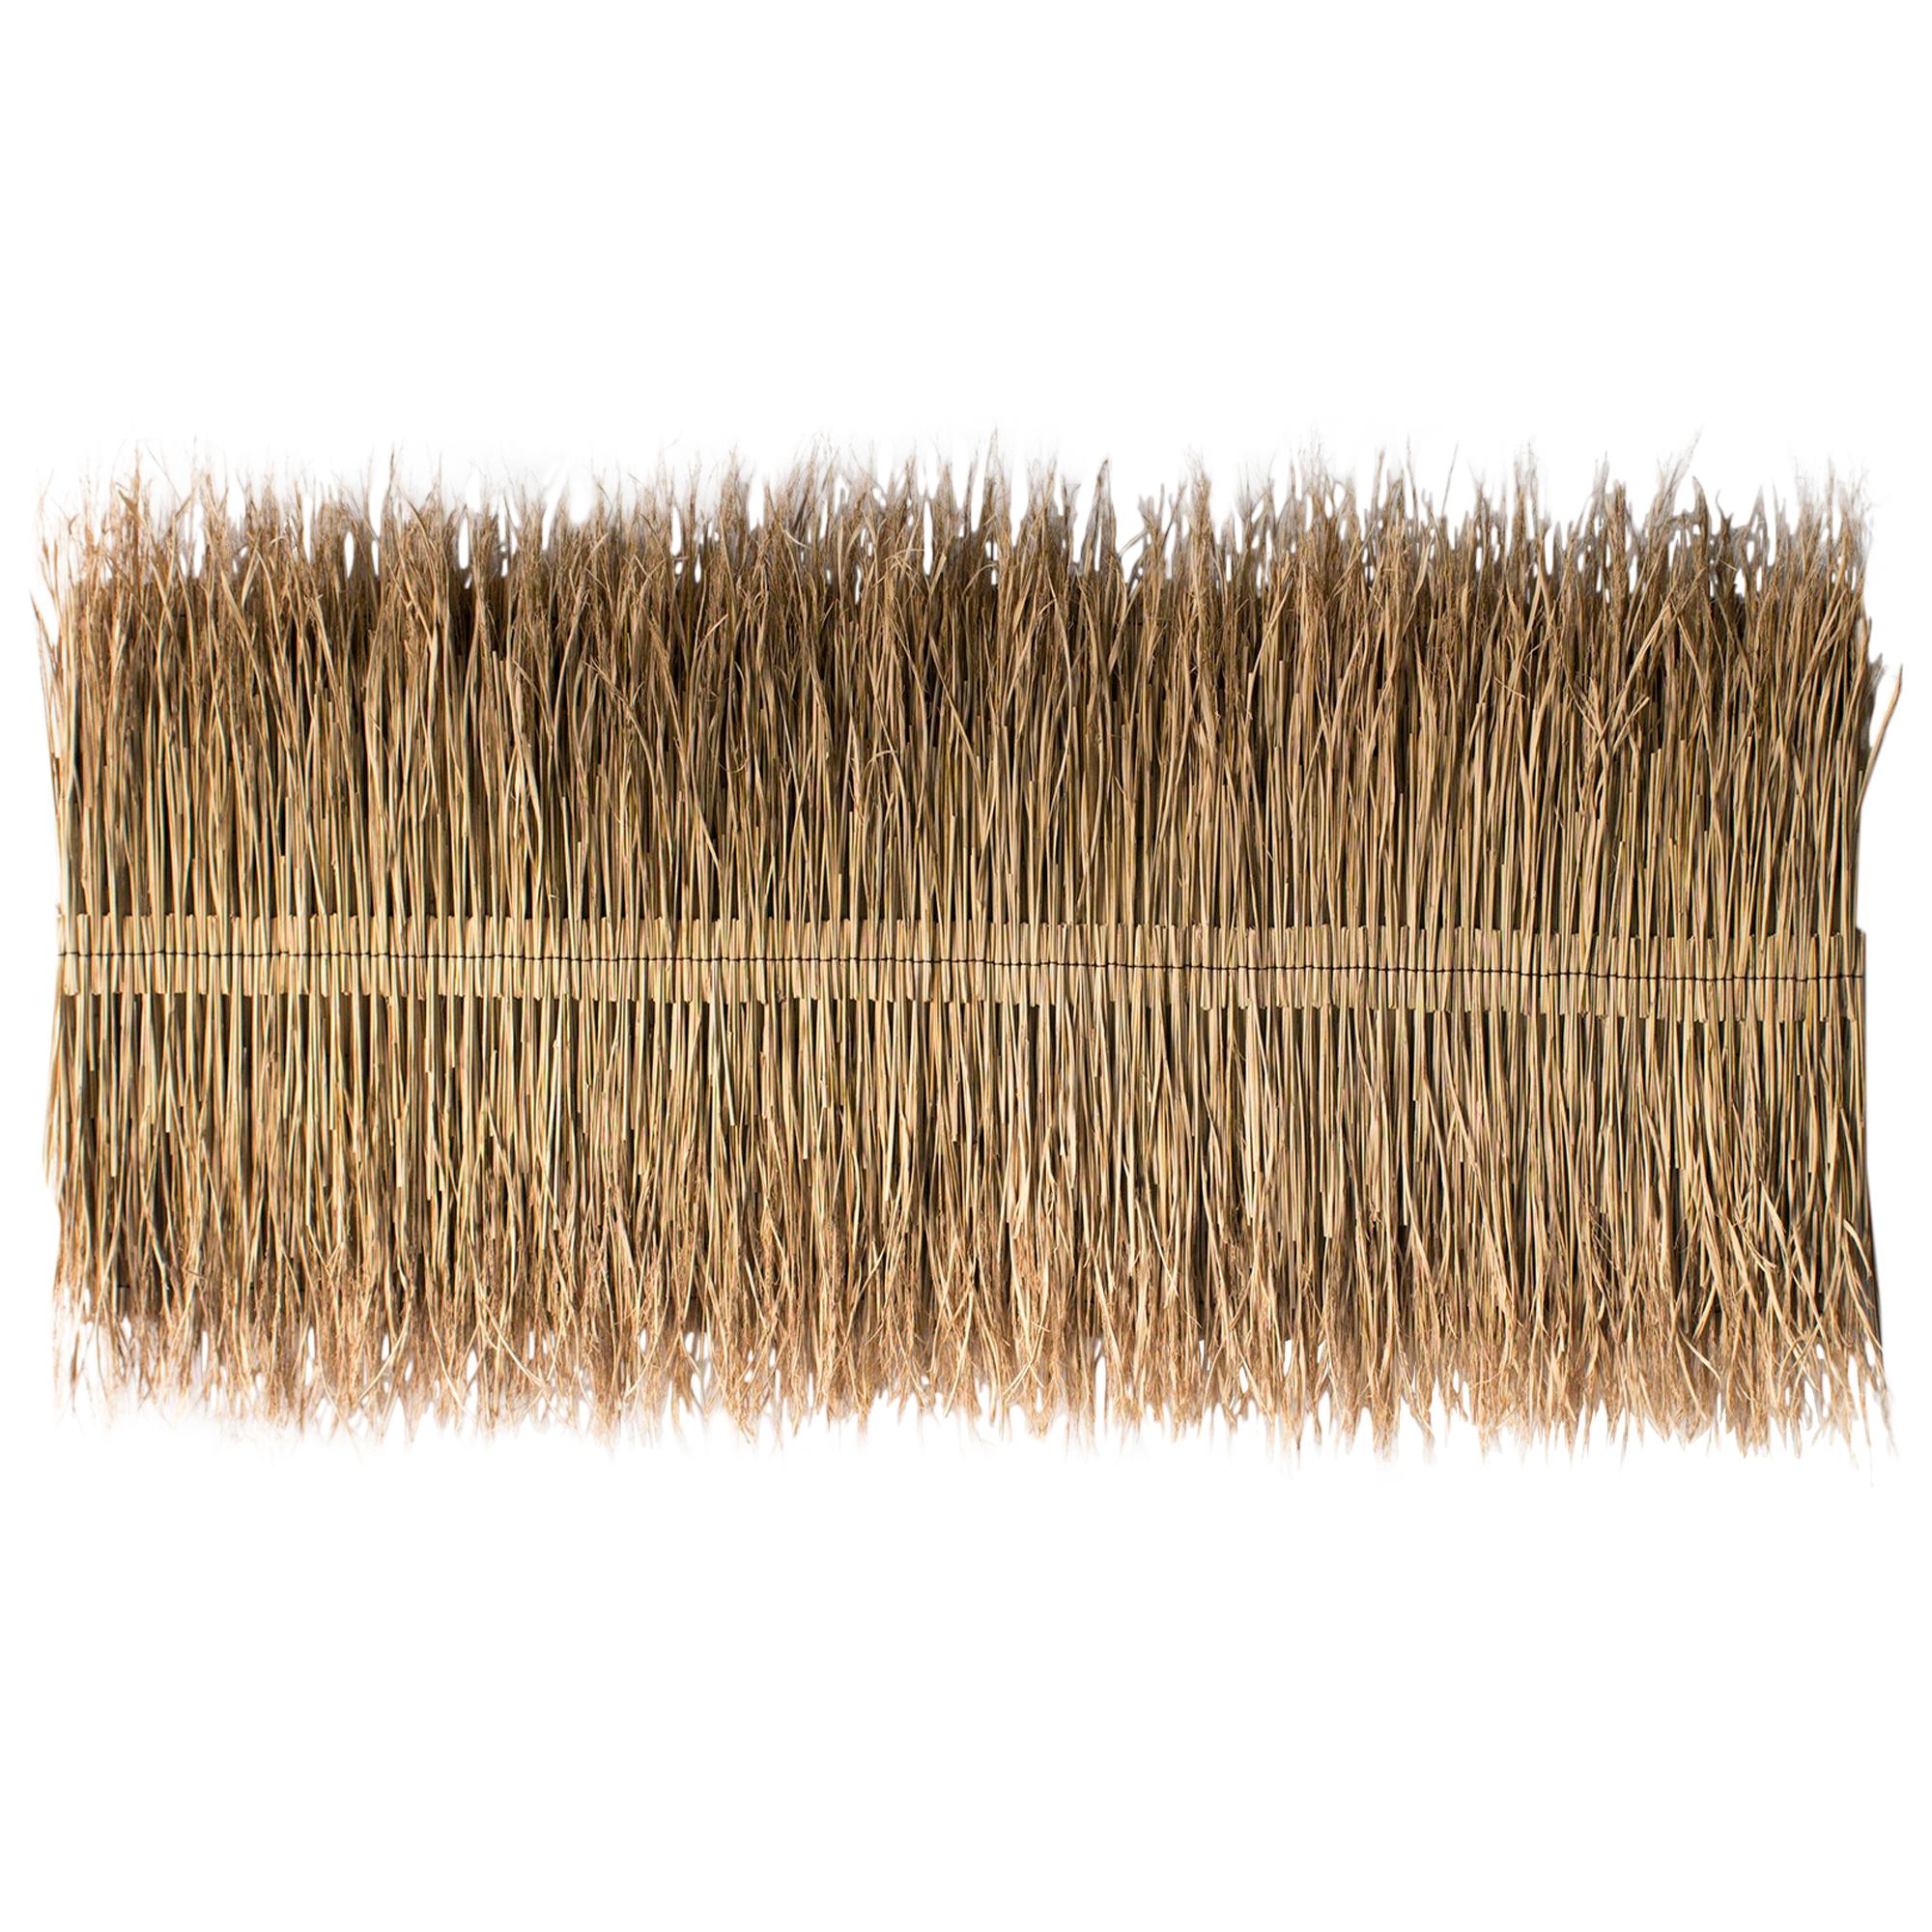 Arko Wall Art 4, Contemporary Art Craft Rice Straw For Sale